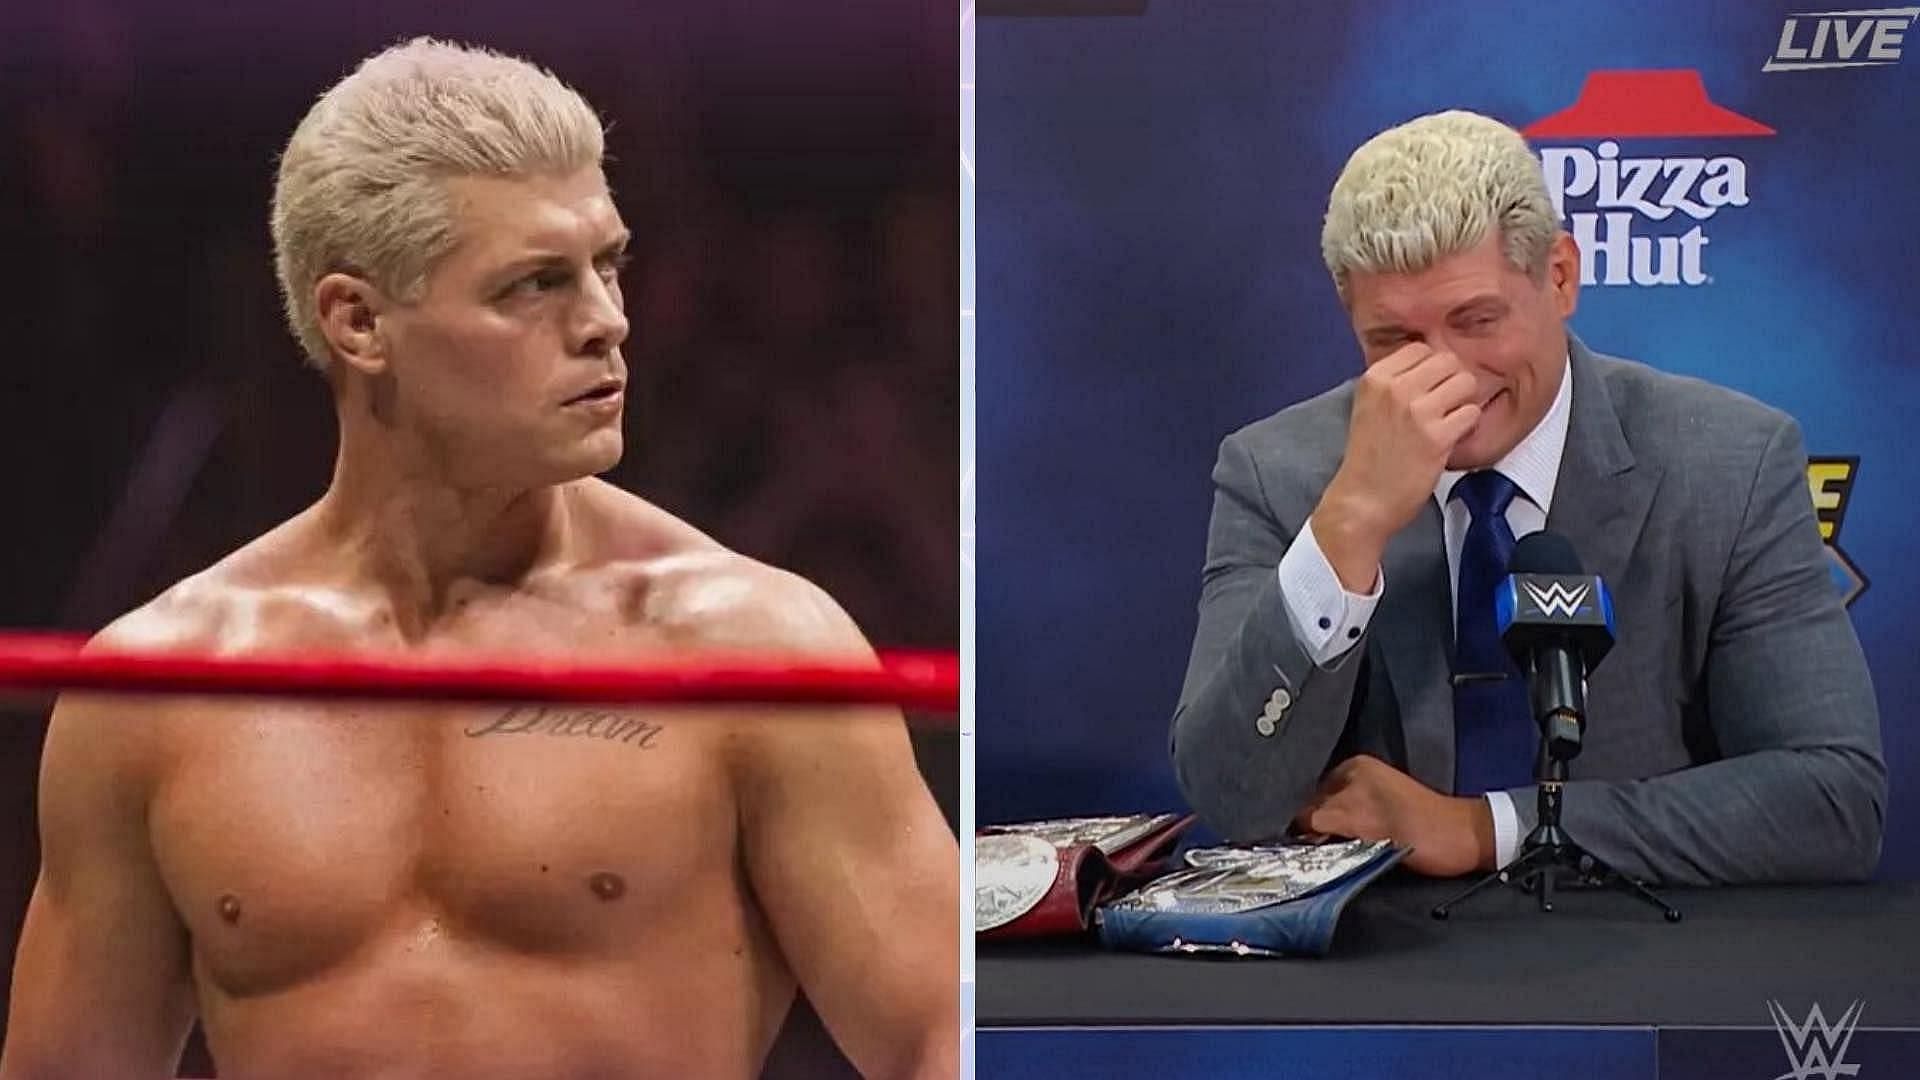 Cody Rhodes is one of the top wrestlers on the WWE Roster